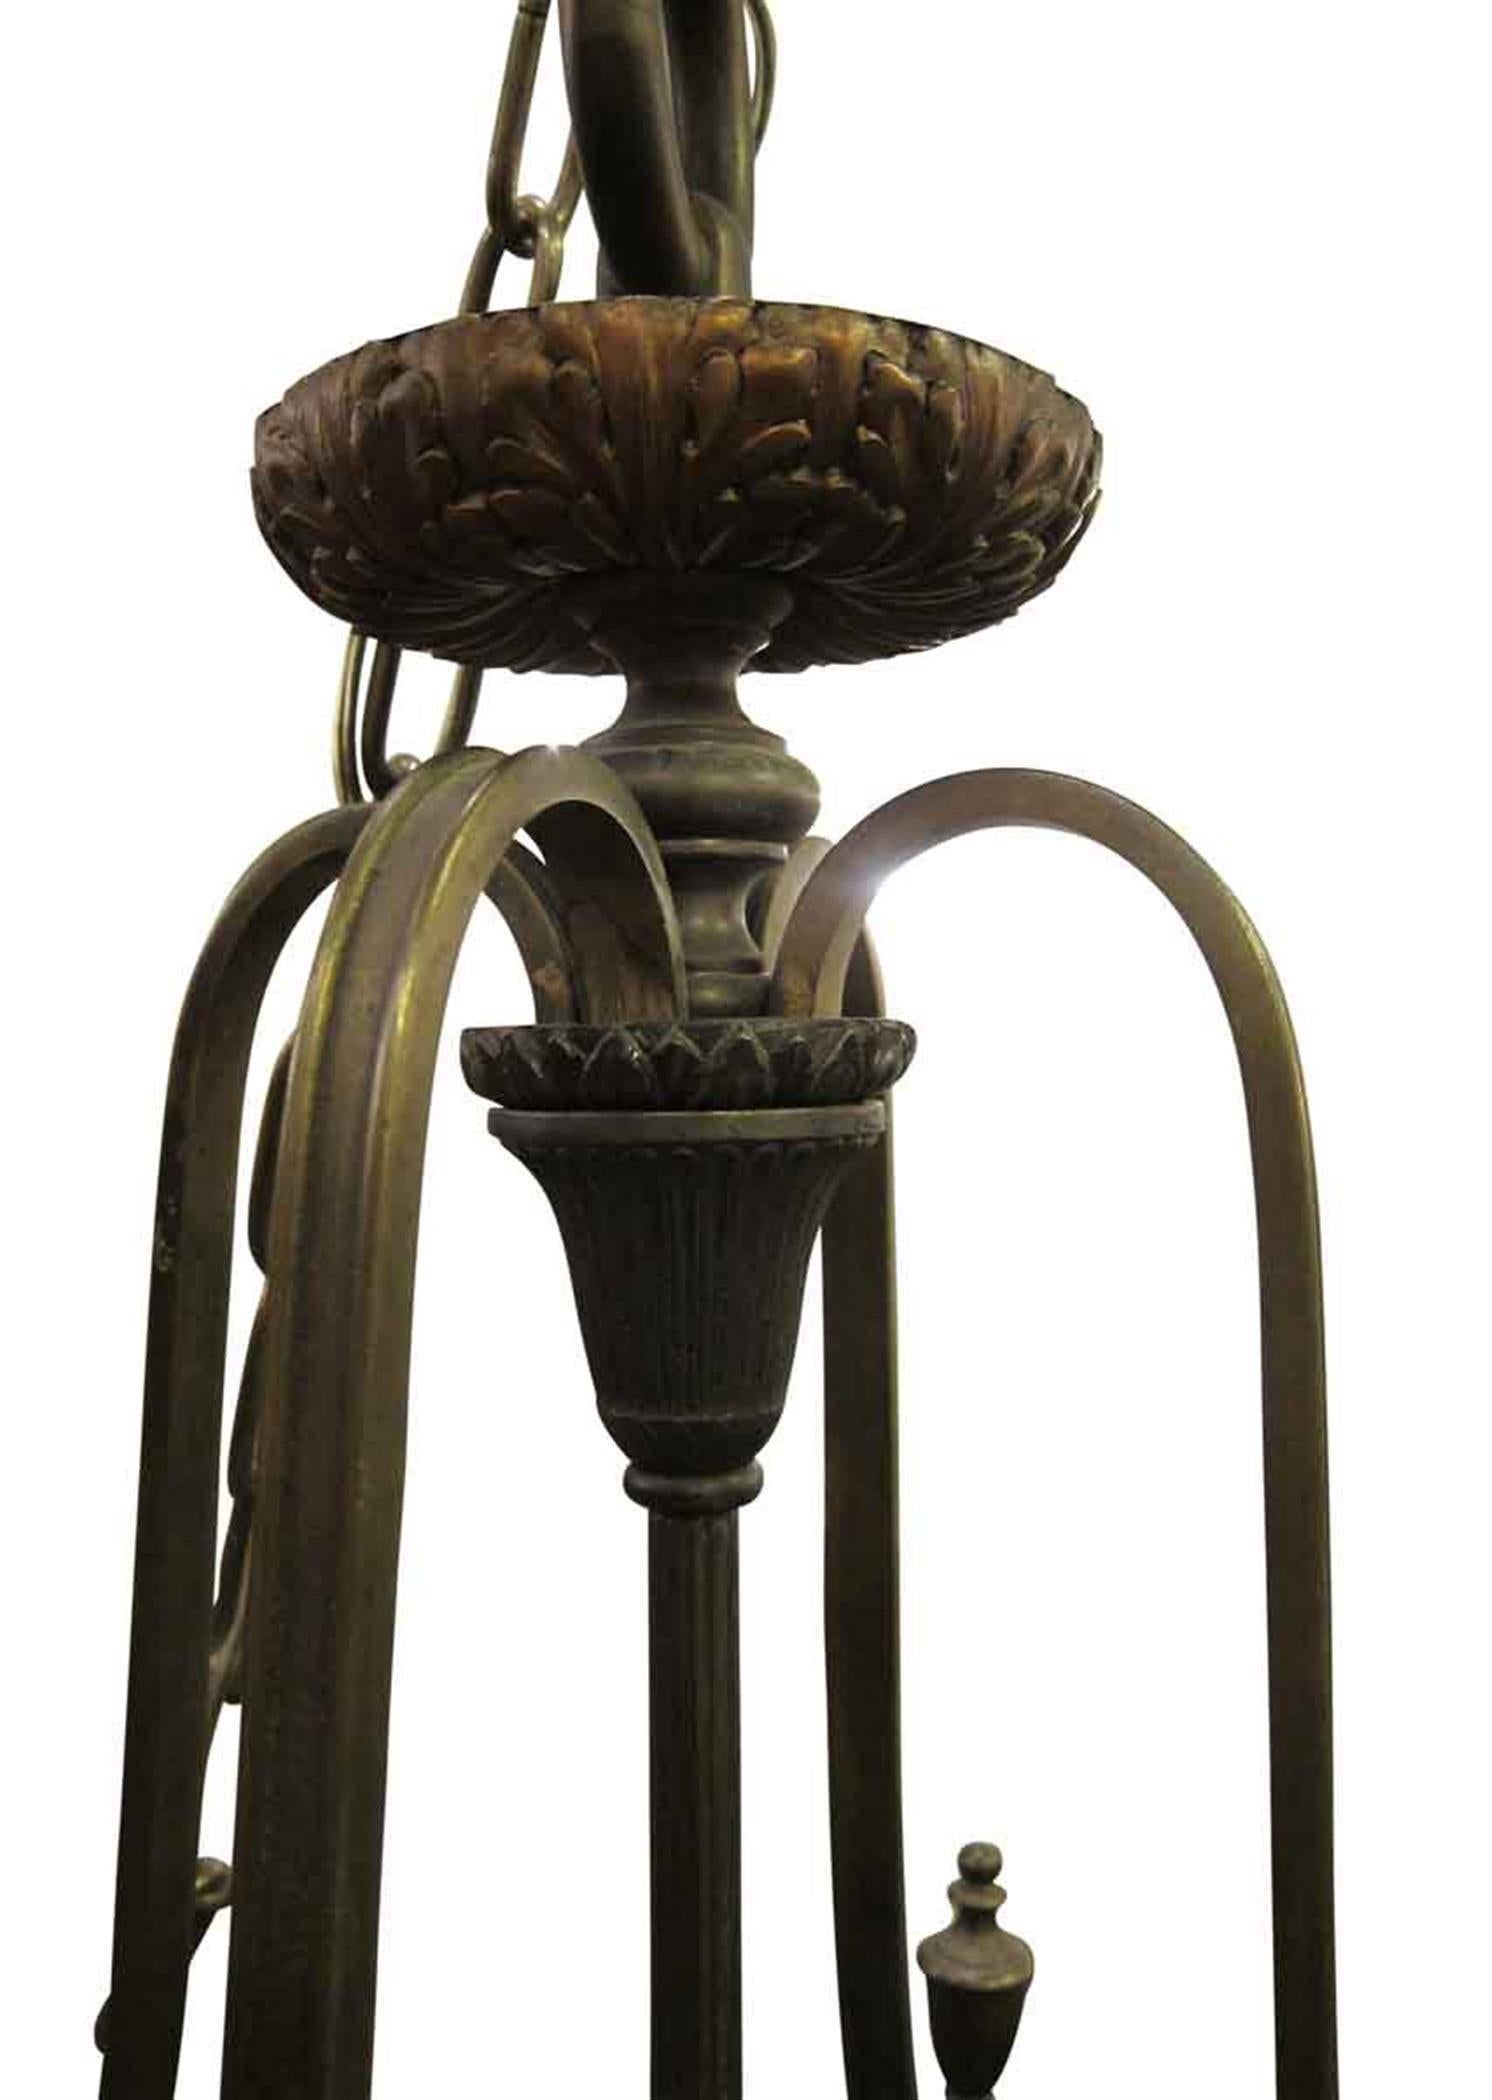 Made by EF Caldwell, New York, circa 1910. This six-light lantern features finely detailed Greek keys on the upper banding and pineapple finials on bottom. Please note, this item is located in one of our NYC locations.